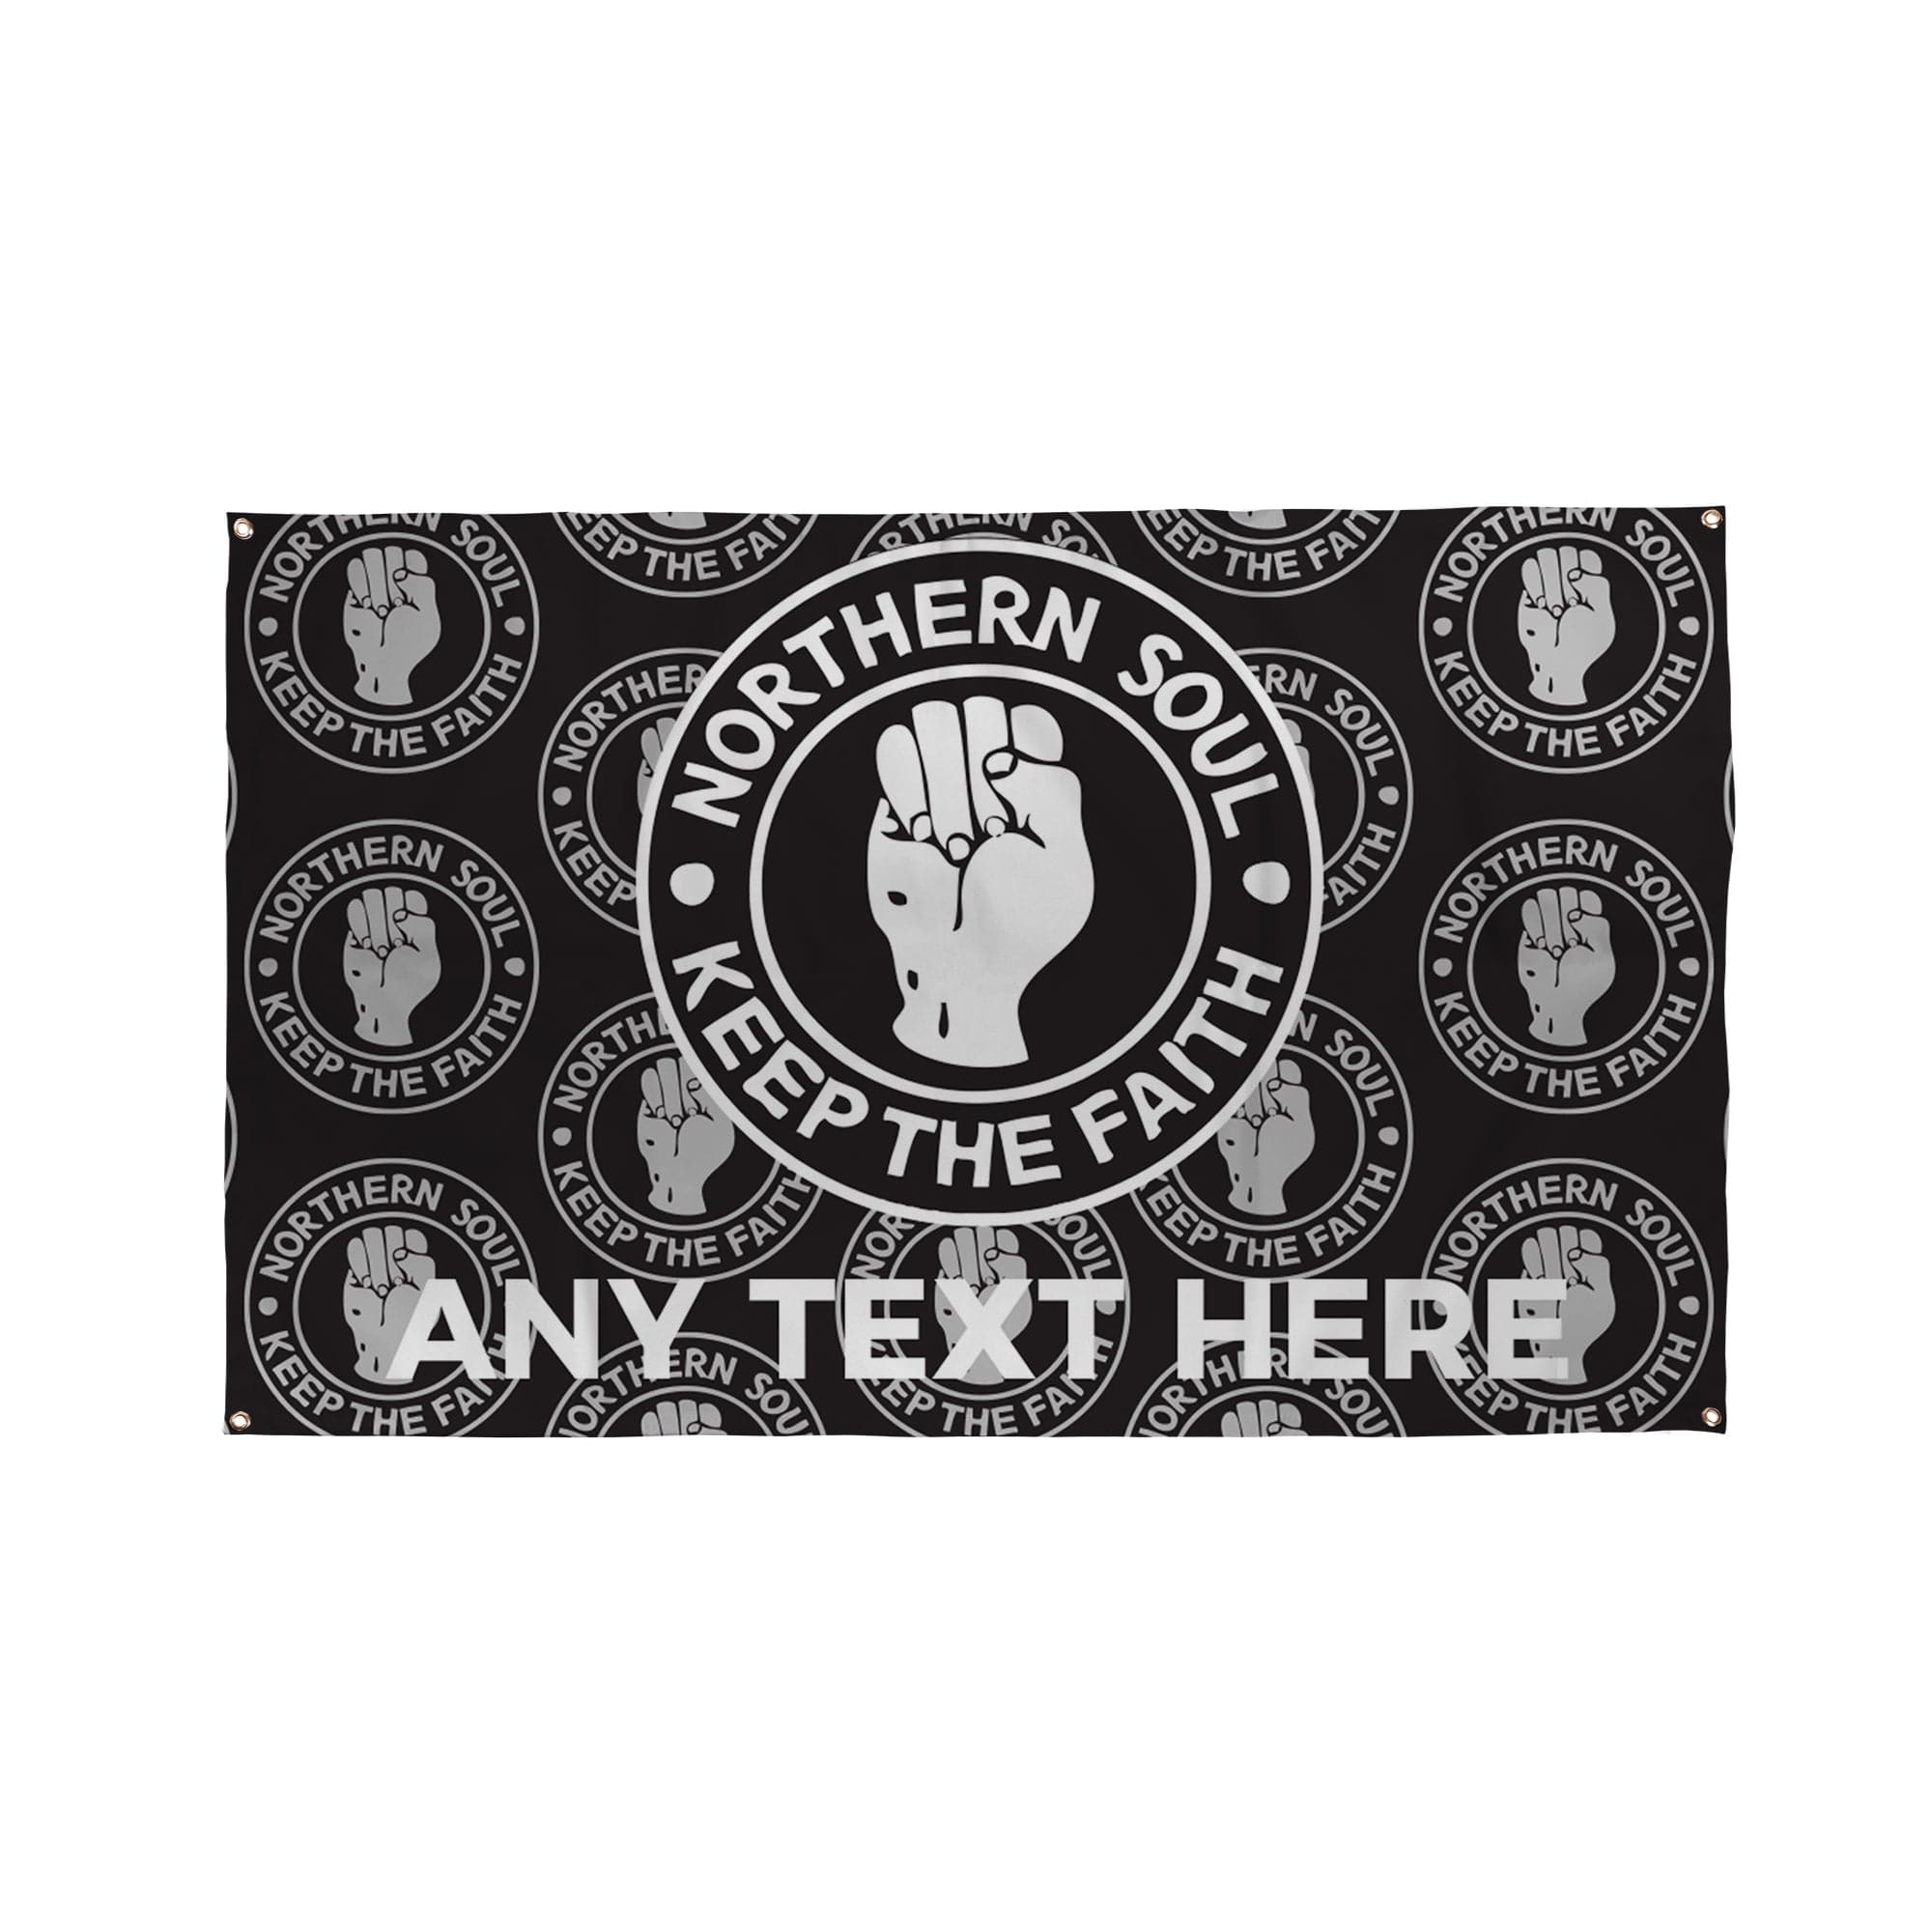 Northern Soul Black Bar Banner - 5ft x 3ft | Funny Pub Signs UKNorthern Soul | Keep the Faith | Add Any Text -  Banner 5ft x 3ft